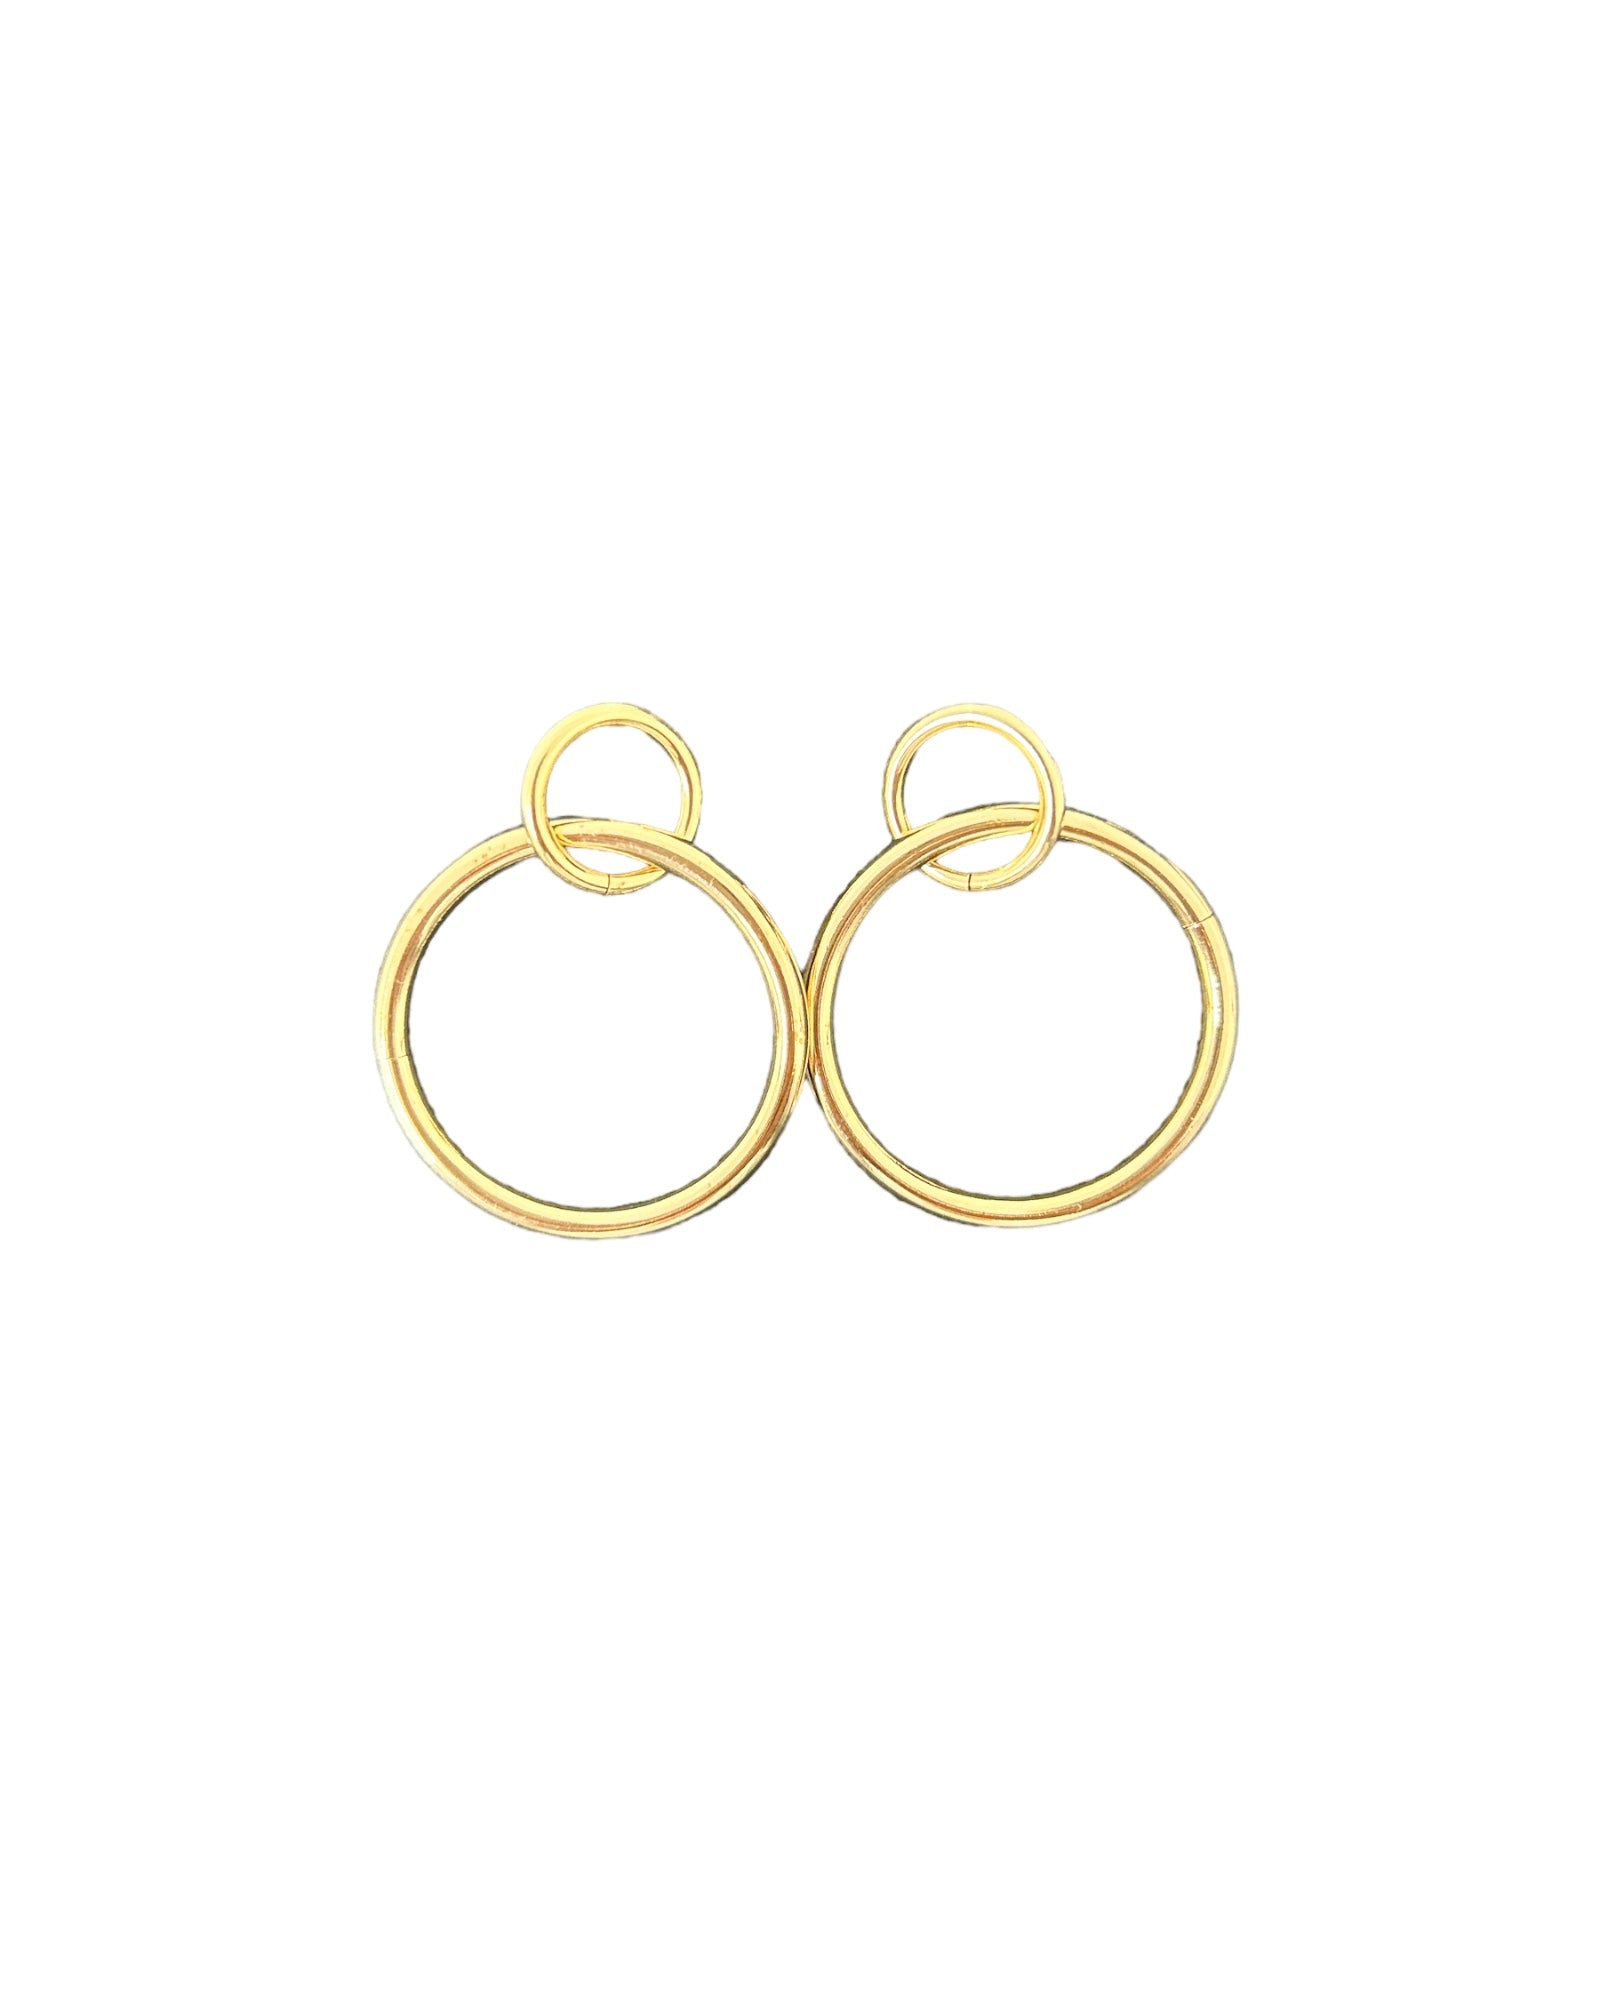 RING LINK EARRINGS- Gold double linked earring, top link is smaller than the bottom. lightweight